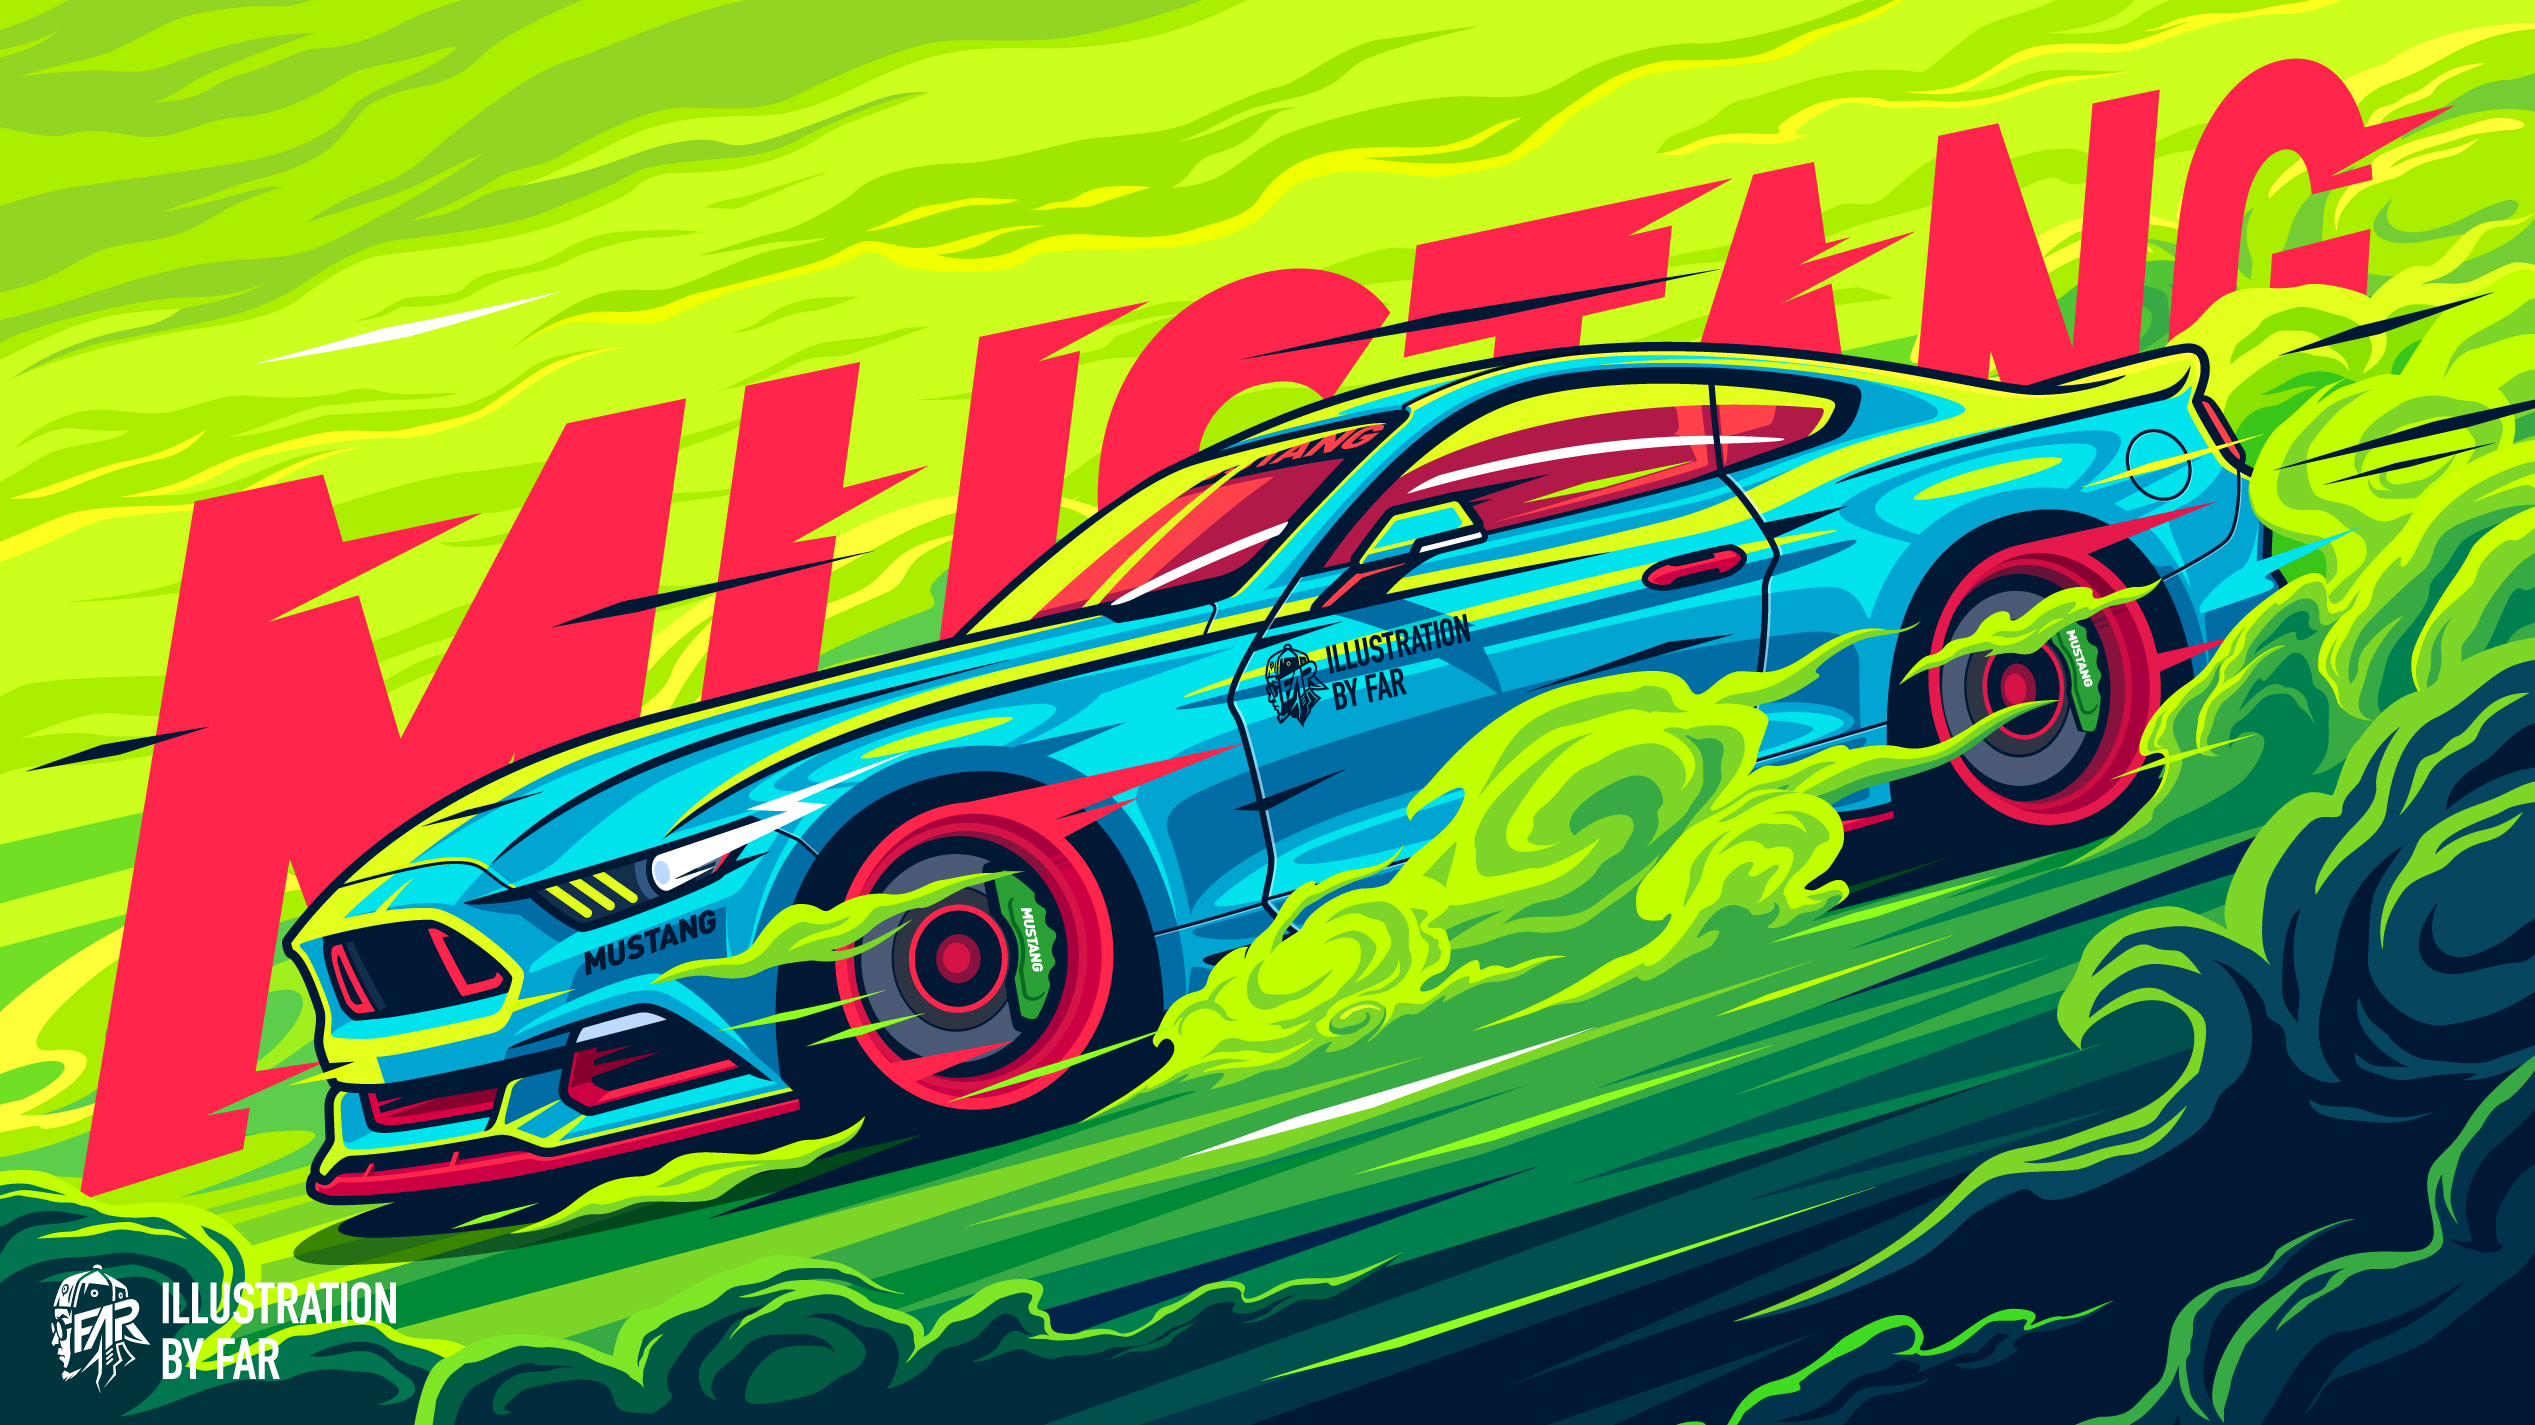 Digital Art Artwork Illustration Car Vehicle Ford Ford Mustang RTR Smoke Watermarked Muscle Cars Ame 2535x1425